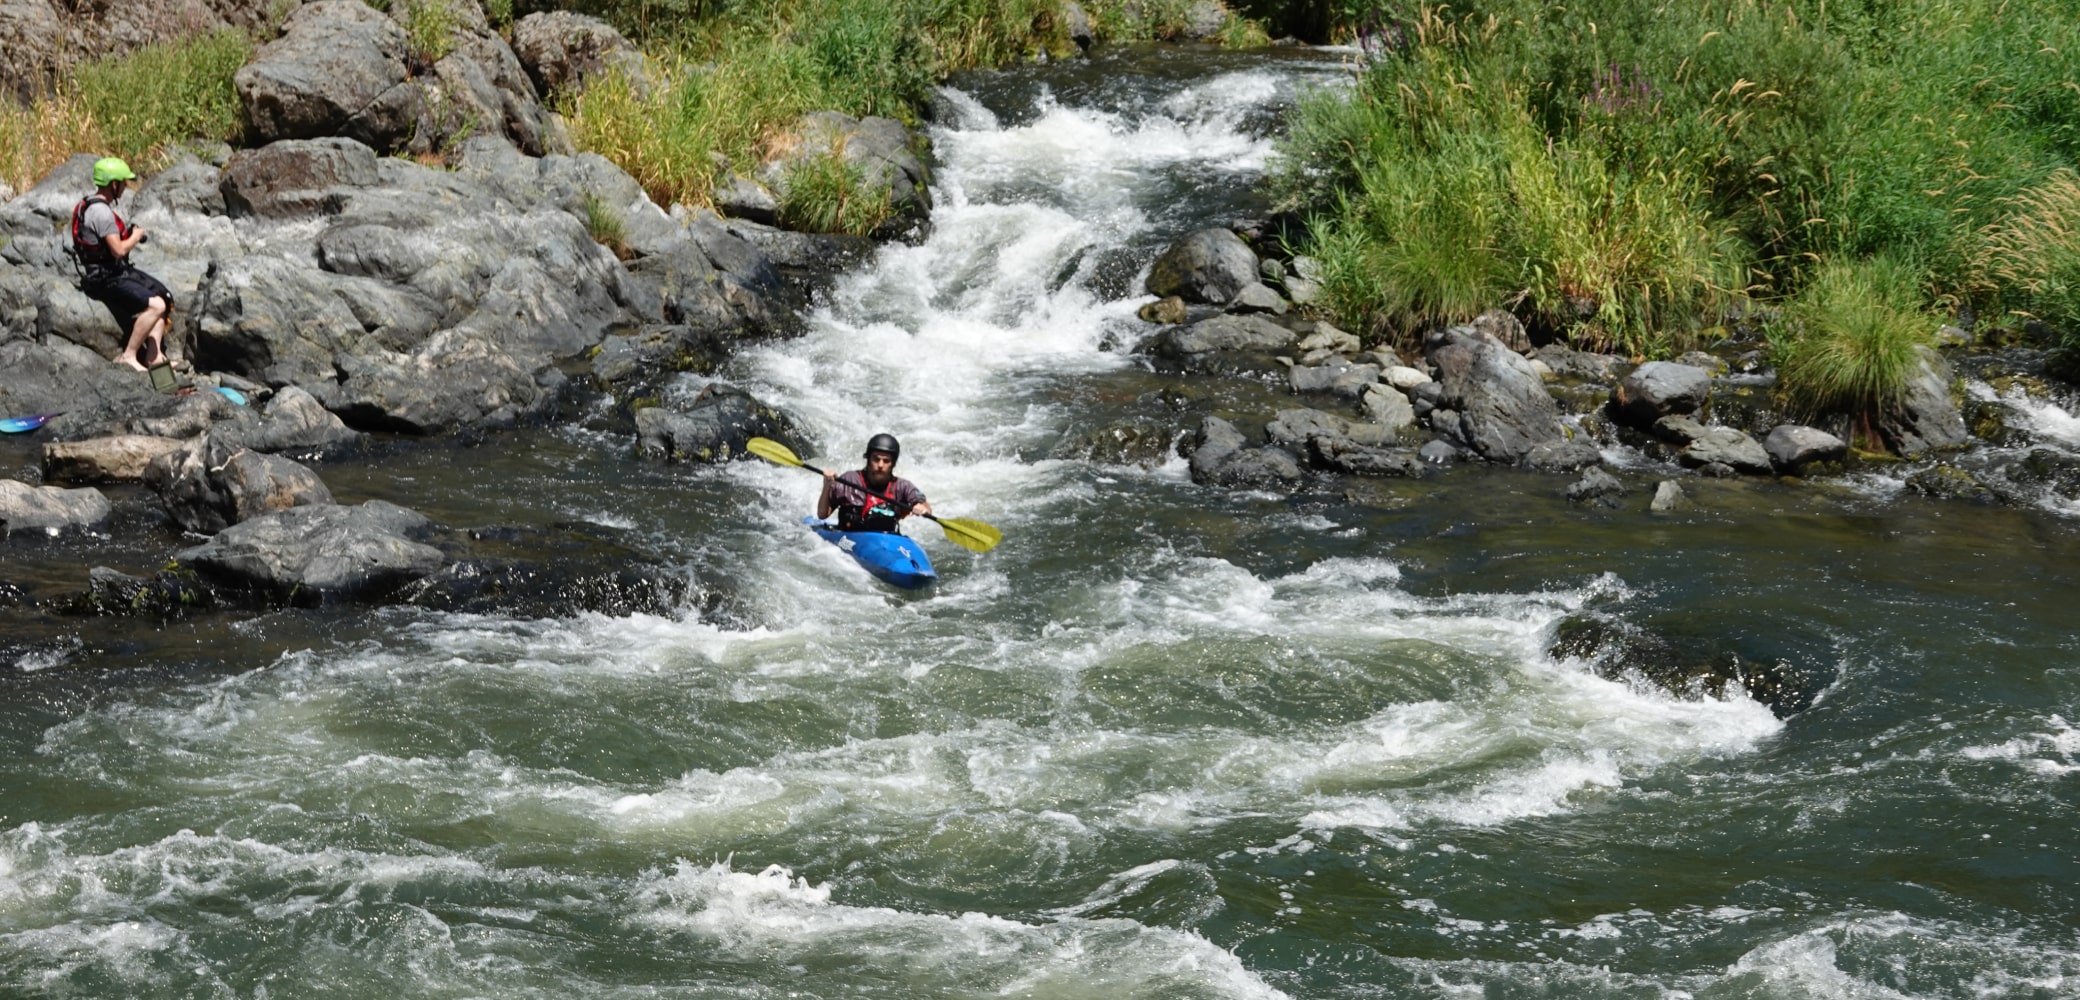 A river kayaker paddles a blue kayak down a small waterfall rapid on the Rogue River.